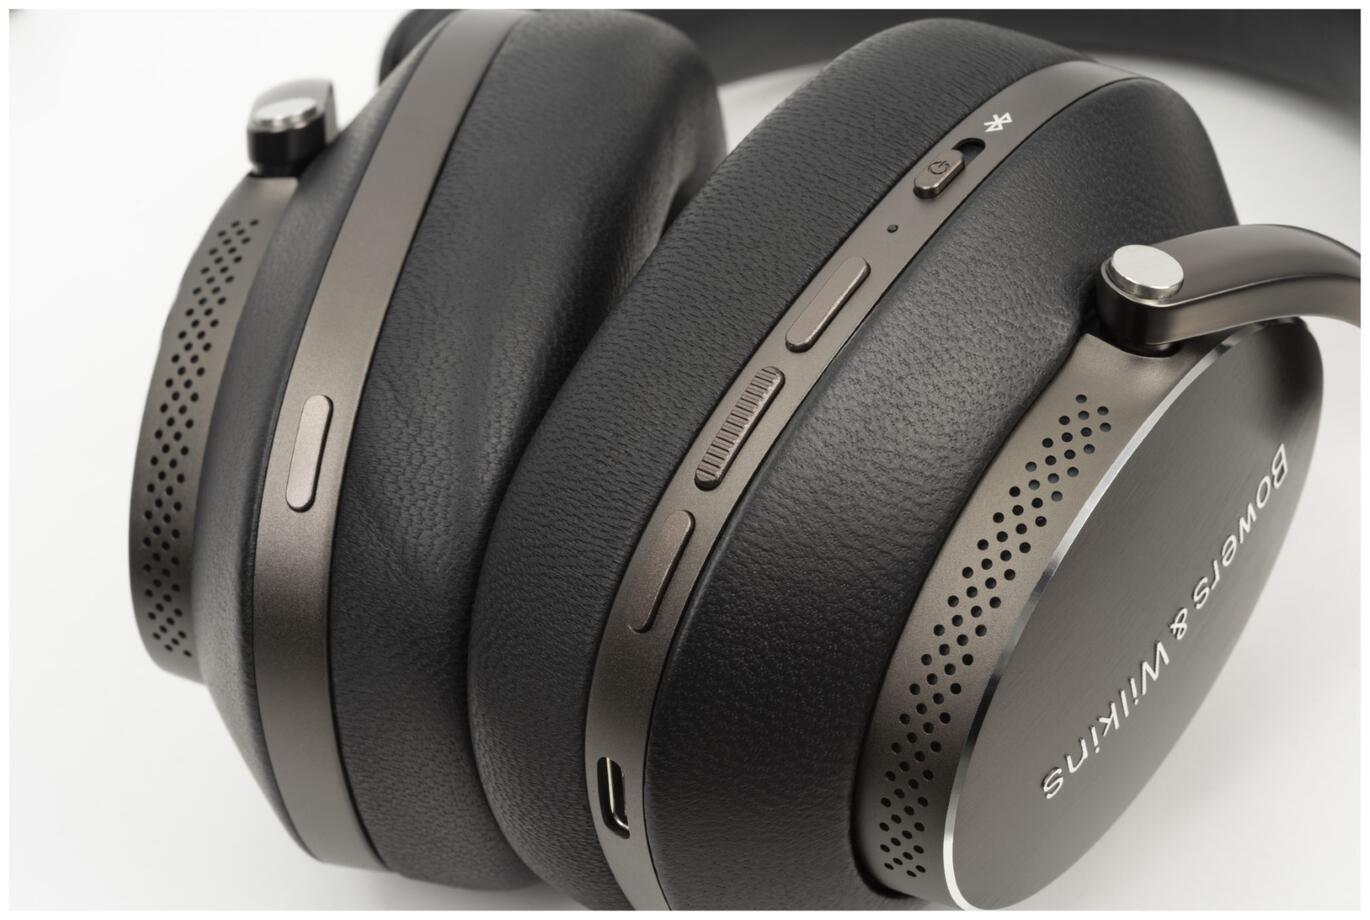 PX8 Bowers & Wilkins